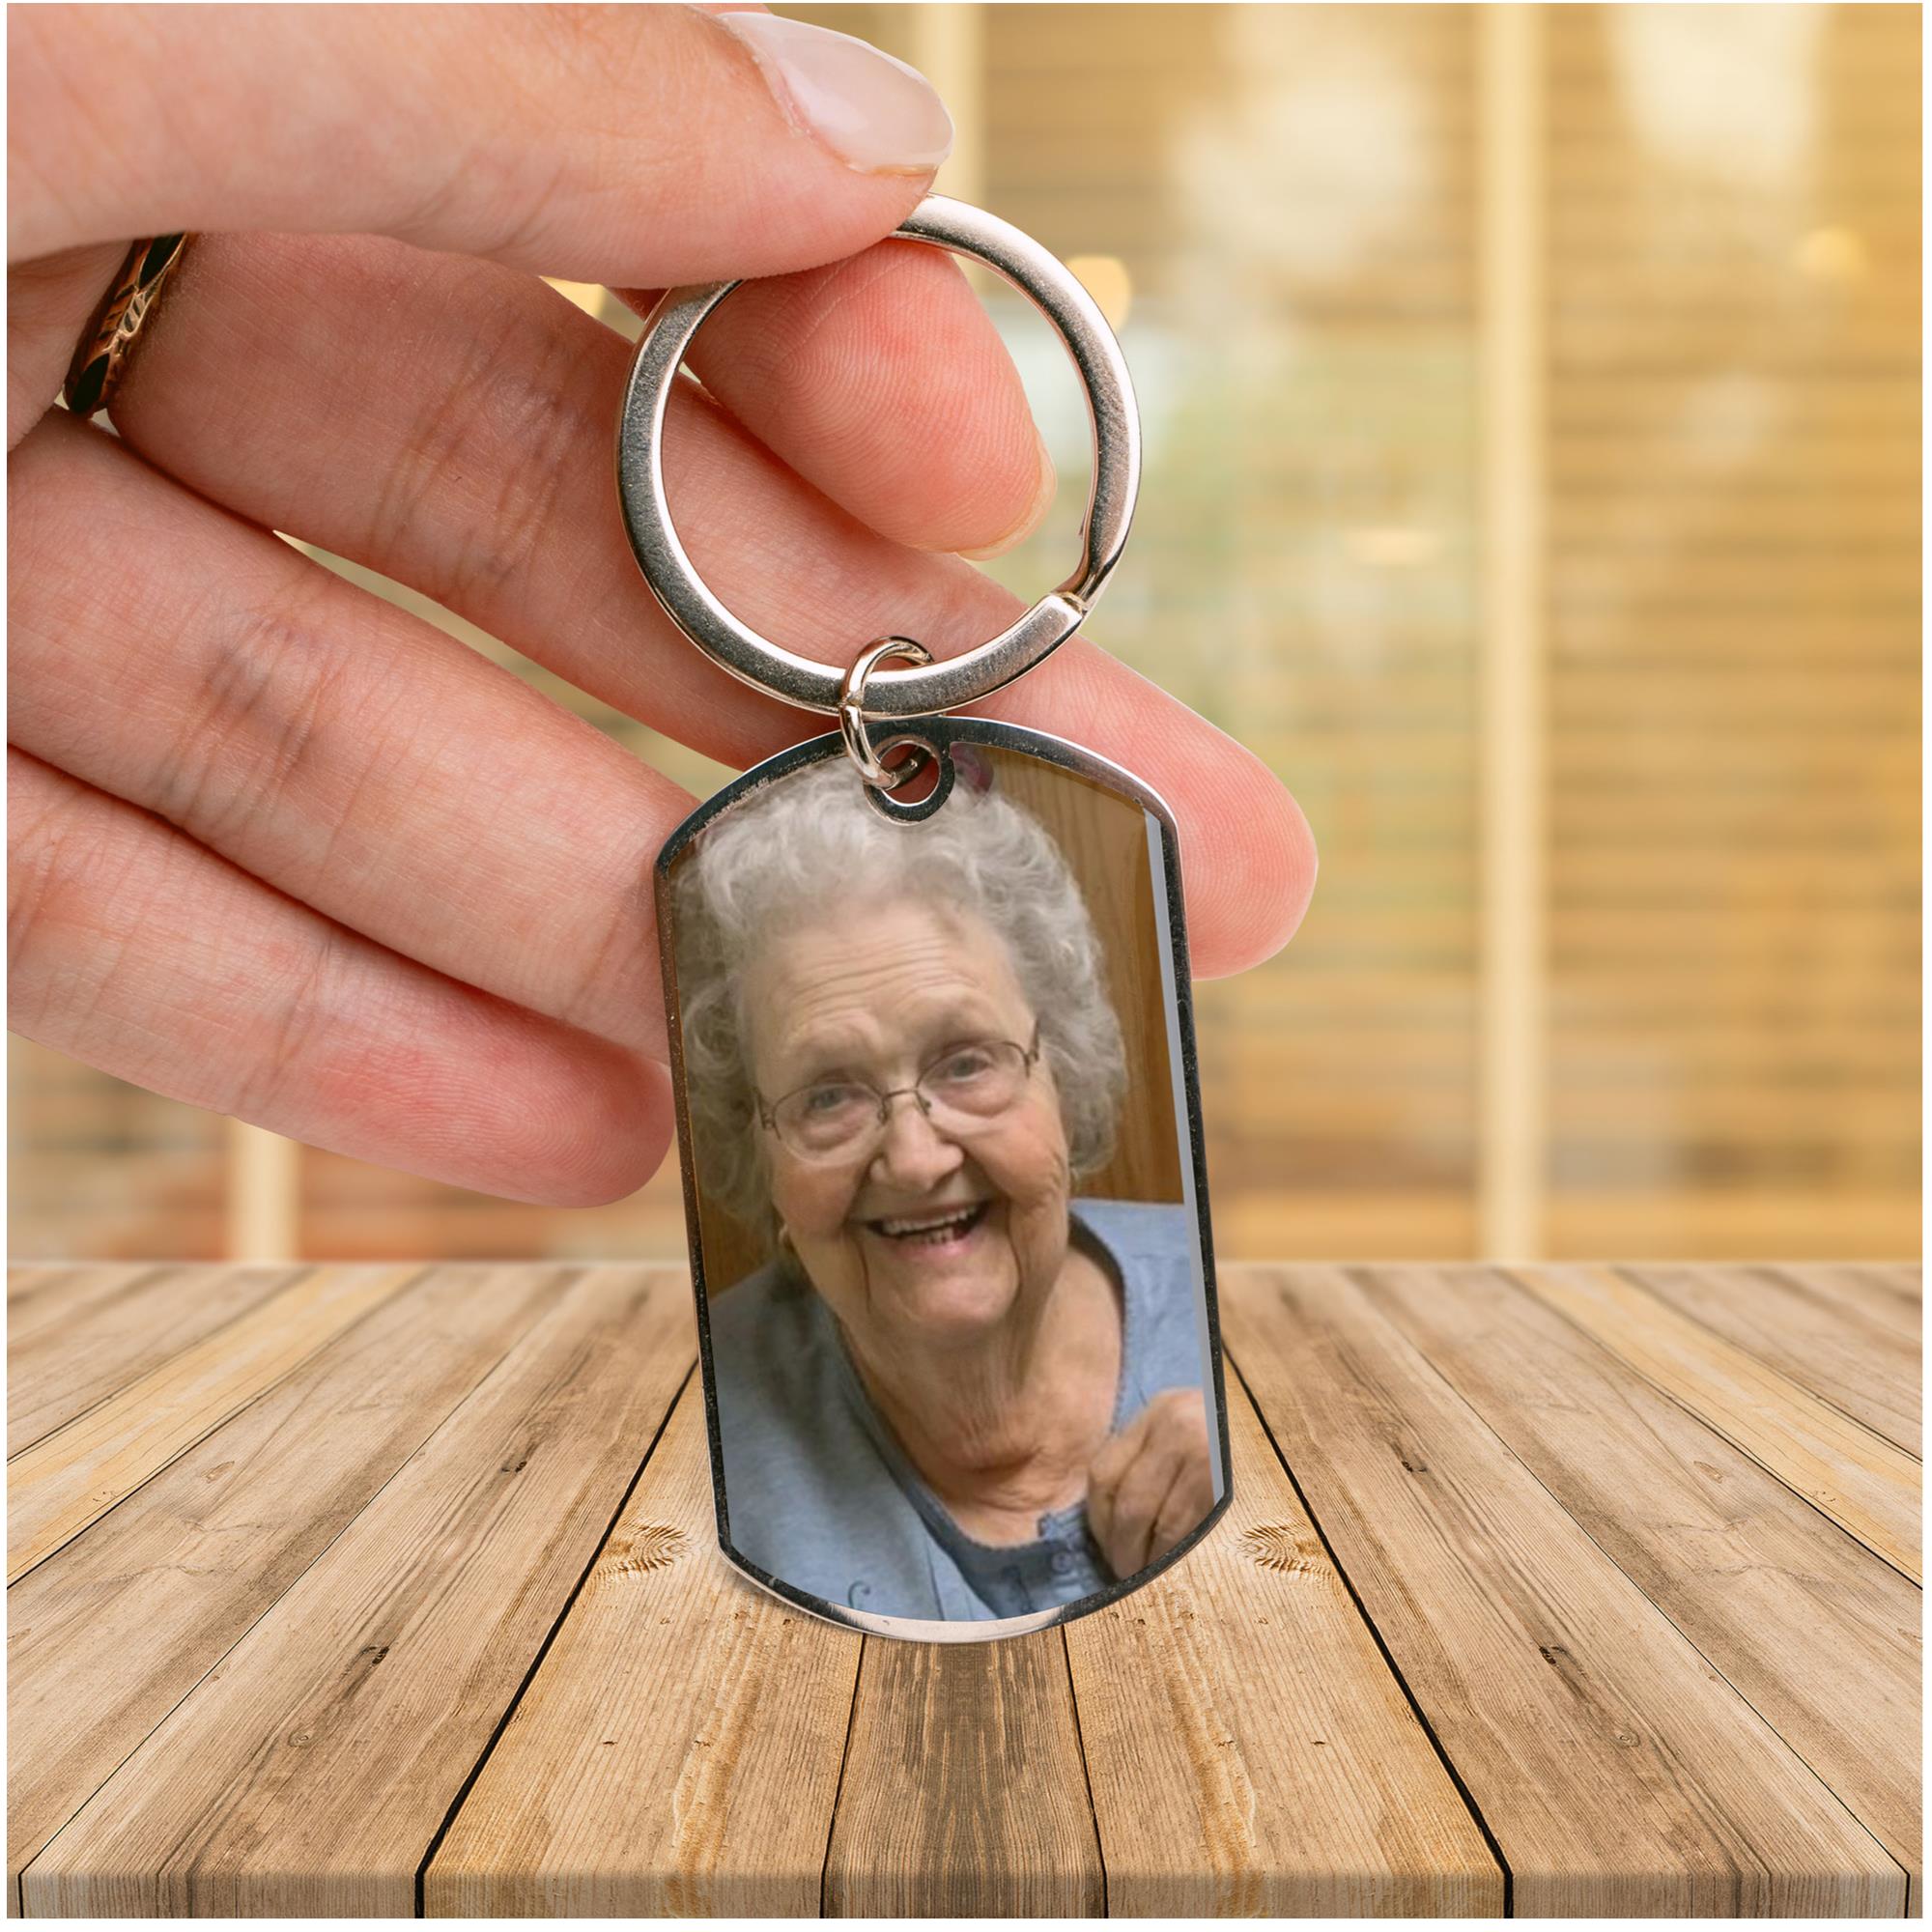 https://necklacespring.com/wp-content/uploads/2023/07/custom-photo-keychain-have-fun-be-safe-make-good-choices-personalized-engraved-metal-keychain-ei-1688179622.jpg